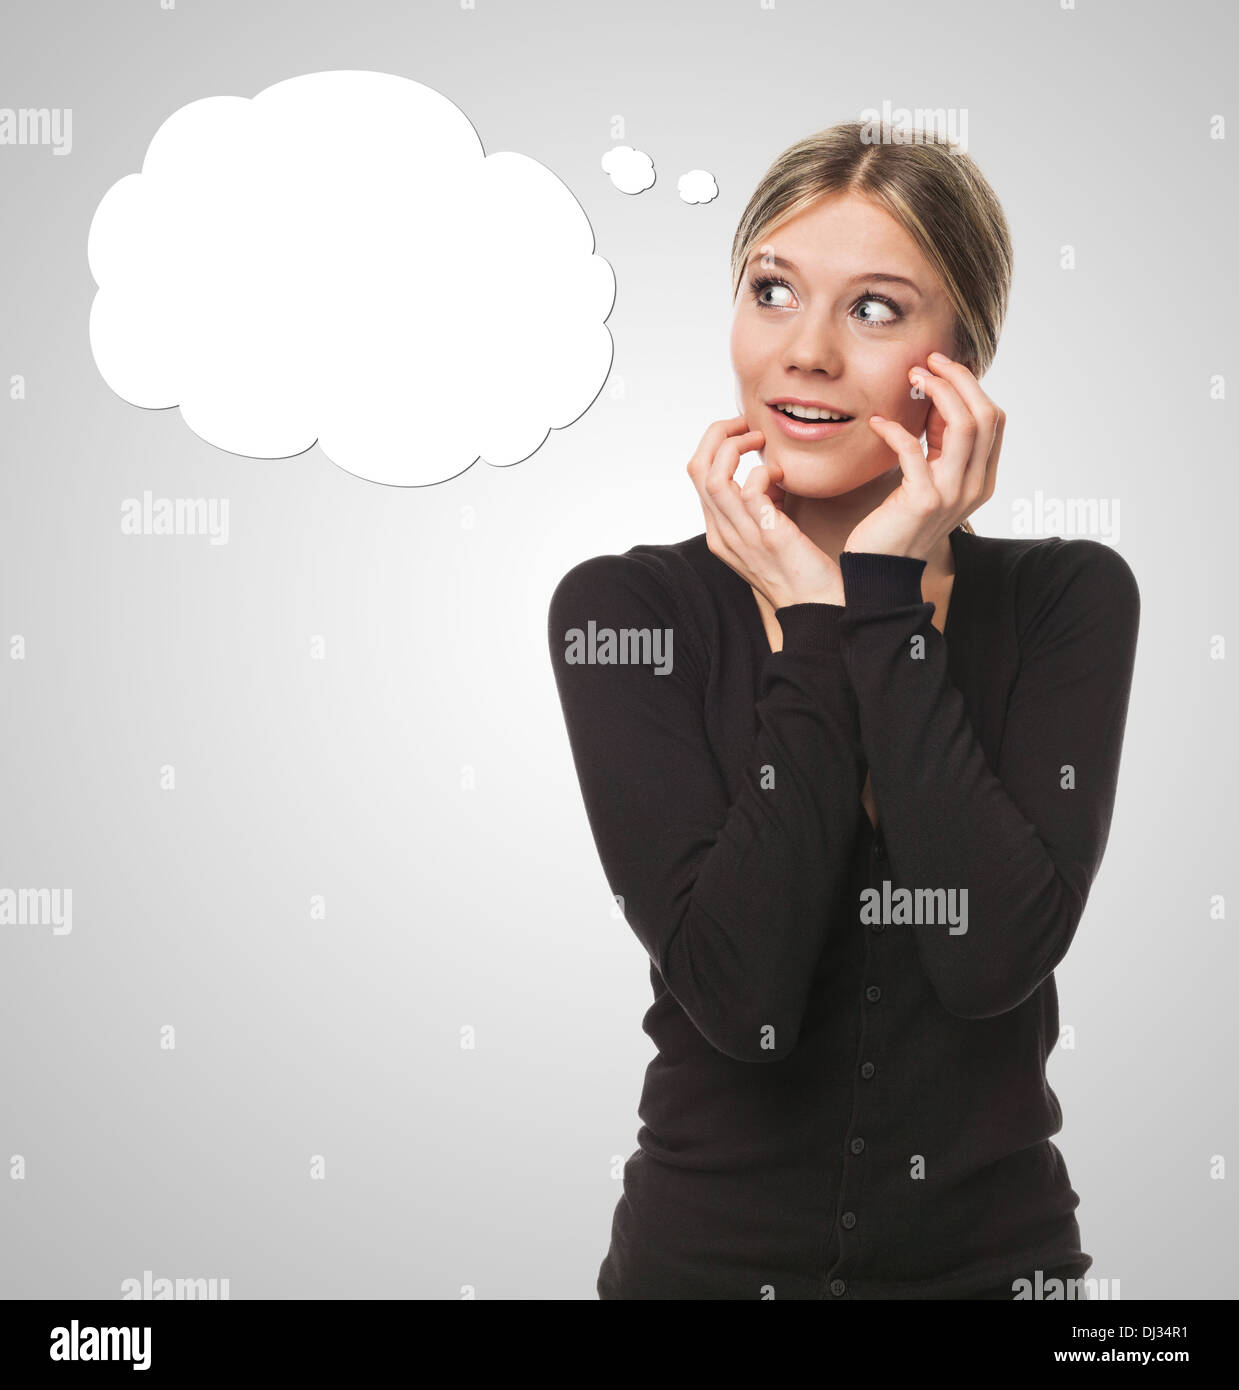 Young woman thinking and looking surprised, with cartoon bubble concept Stock Photo